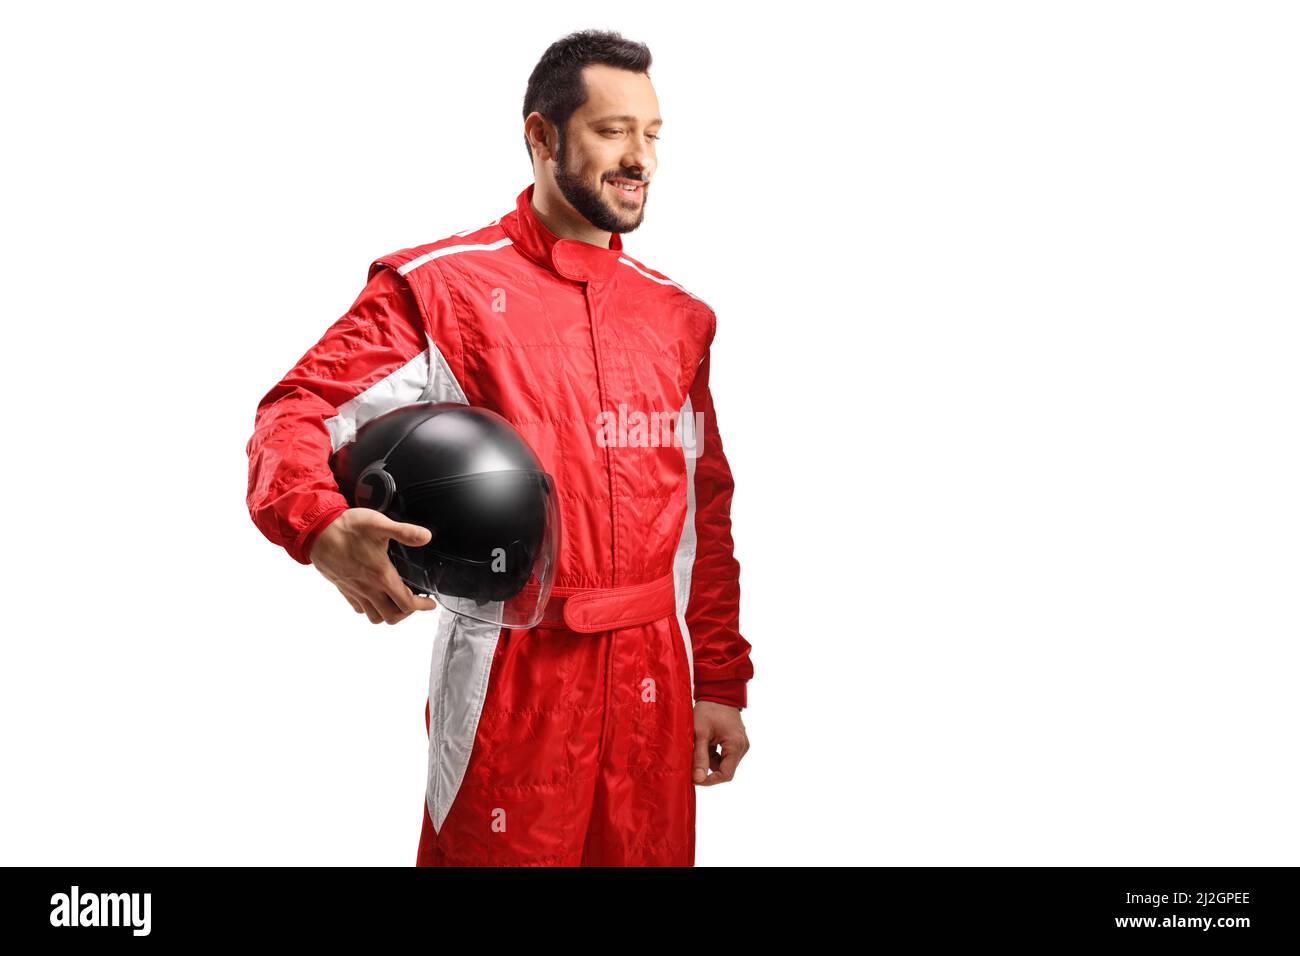 Smiling racer in a red suit holding a black helmet and looking to the side isolated on white background Stock Photo